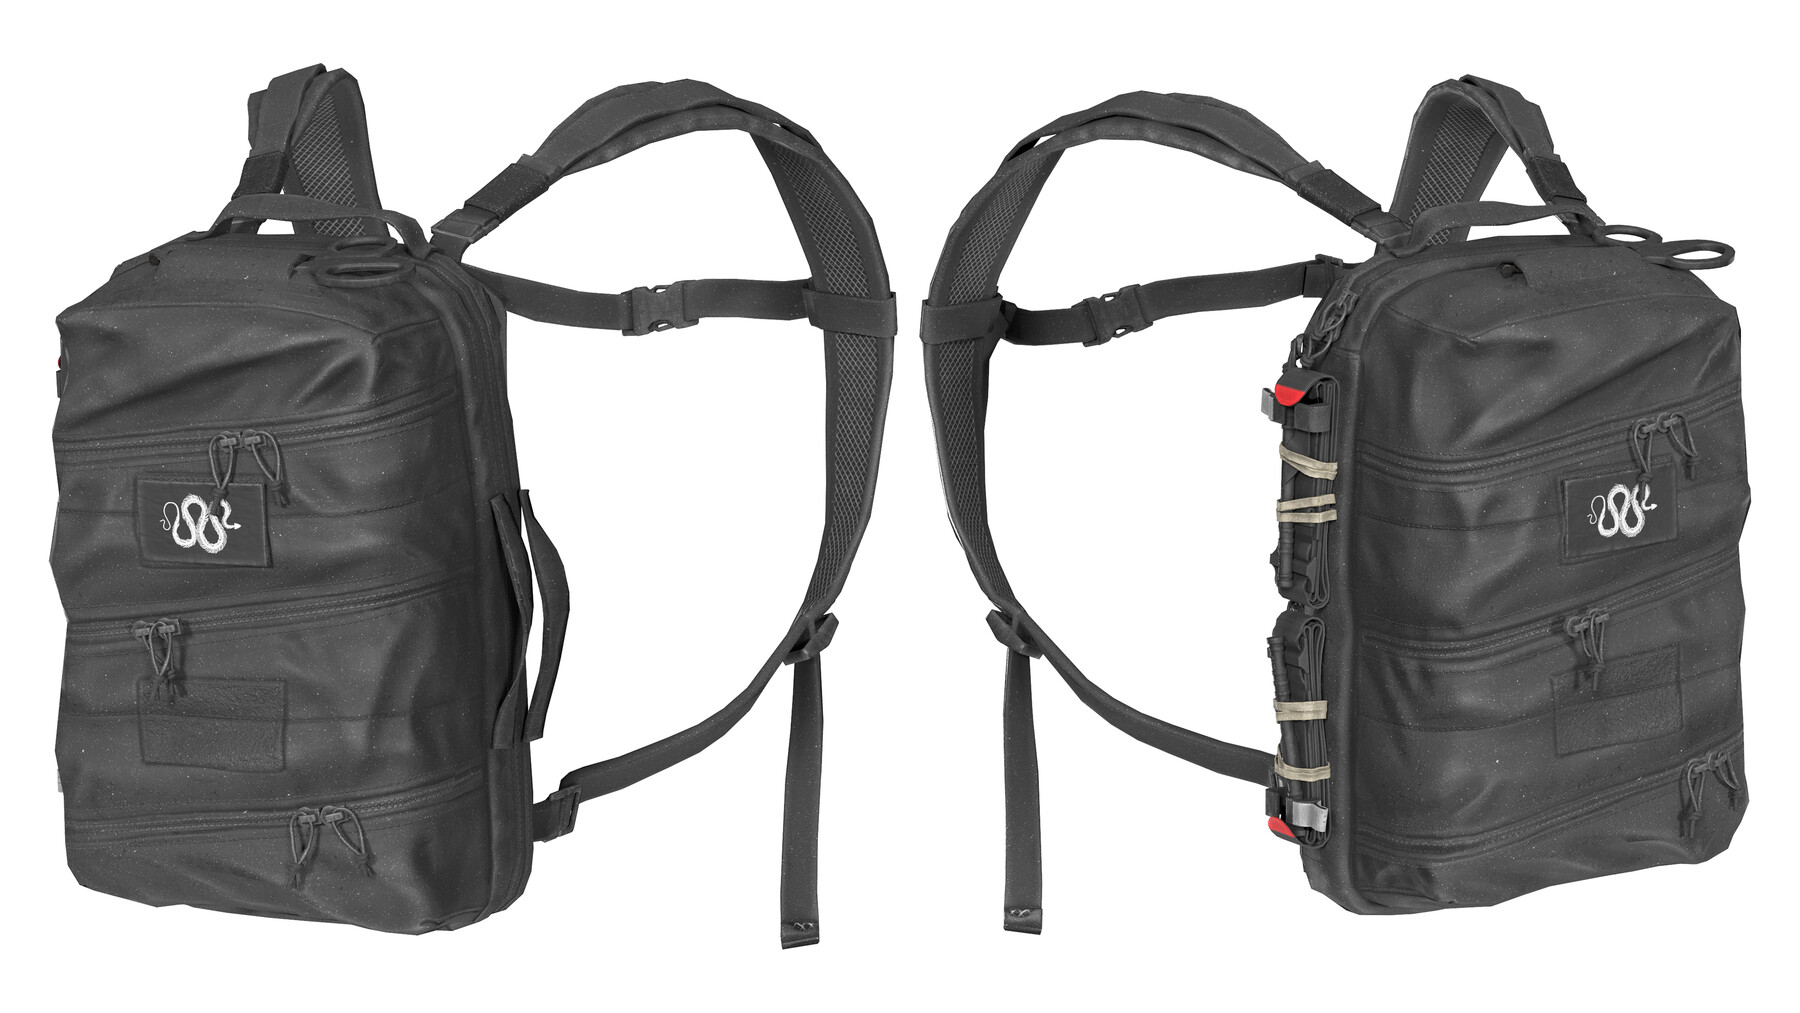 Delta Backpack - Black - Unisex Accessories from